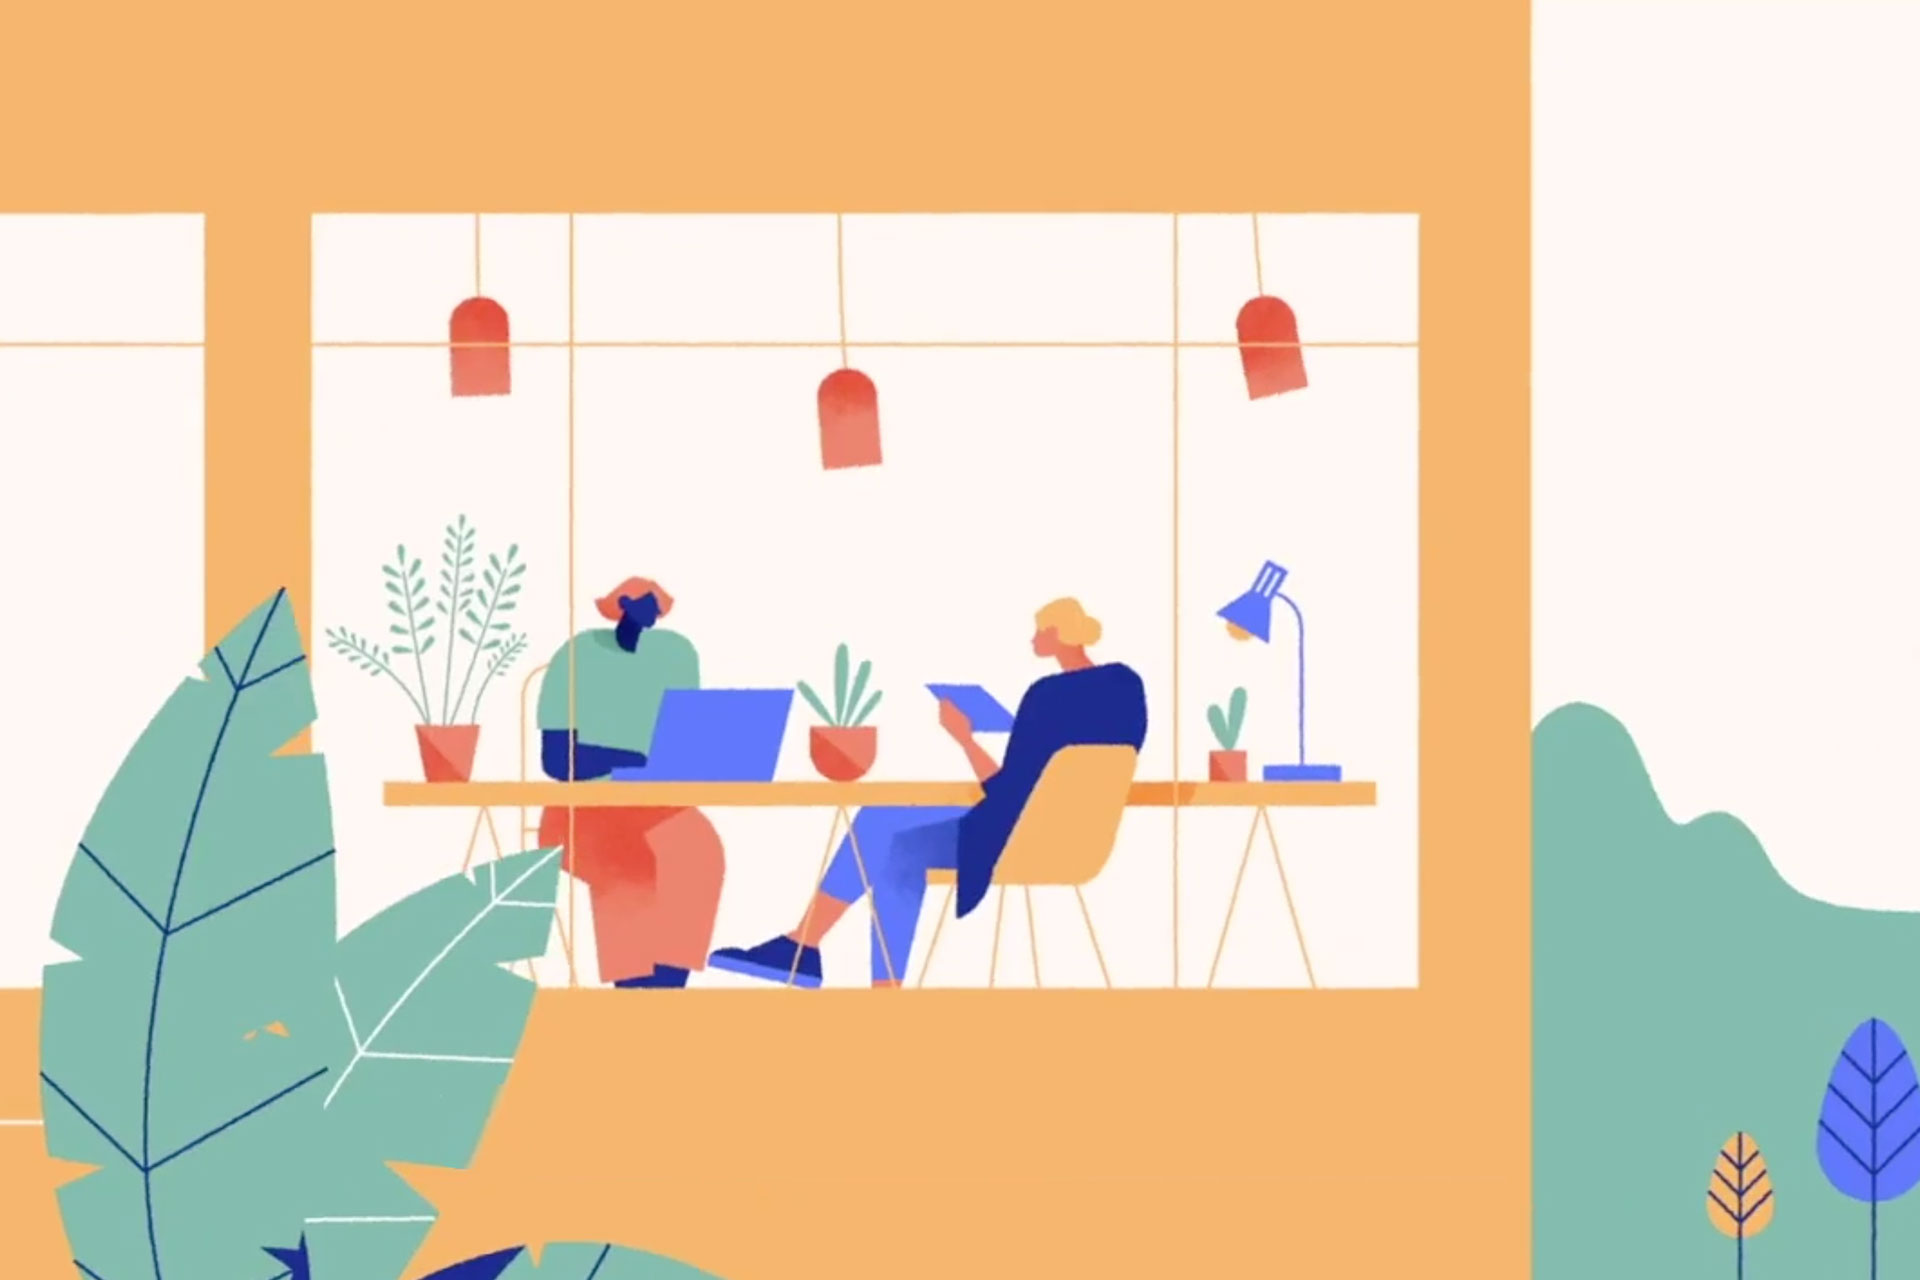 Illustration of two people working at a desk surrounded by plants